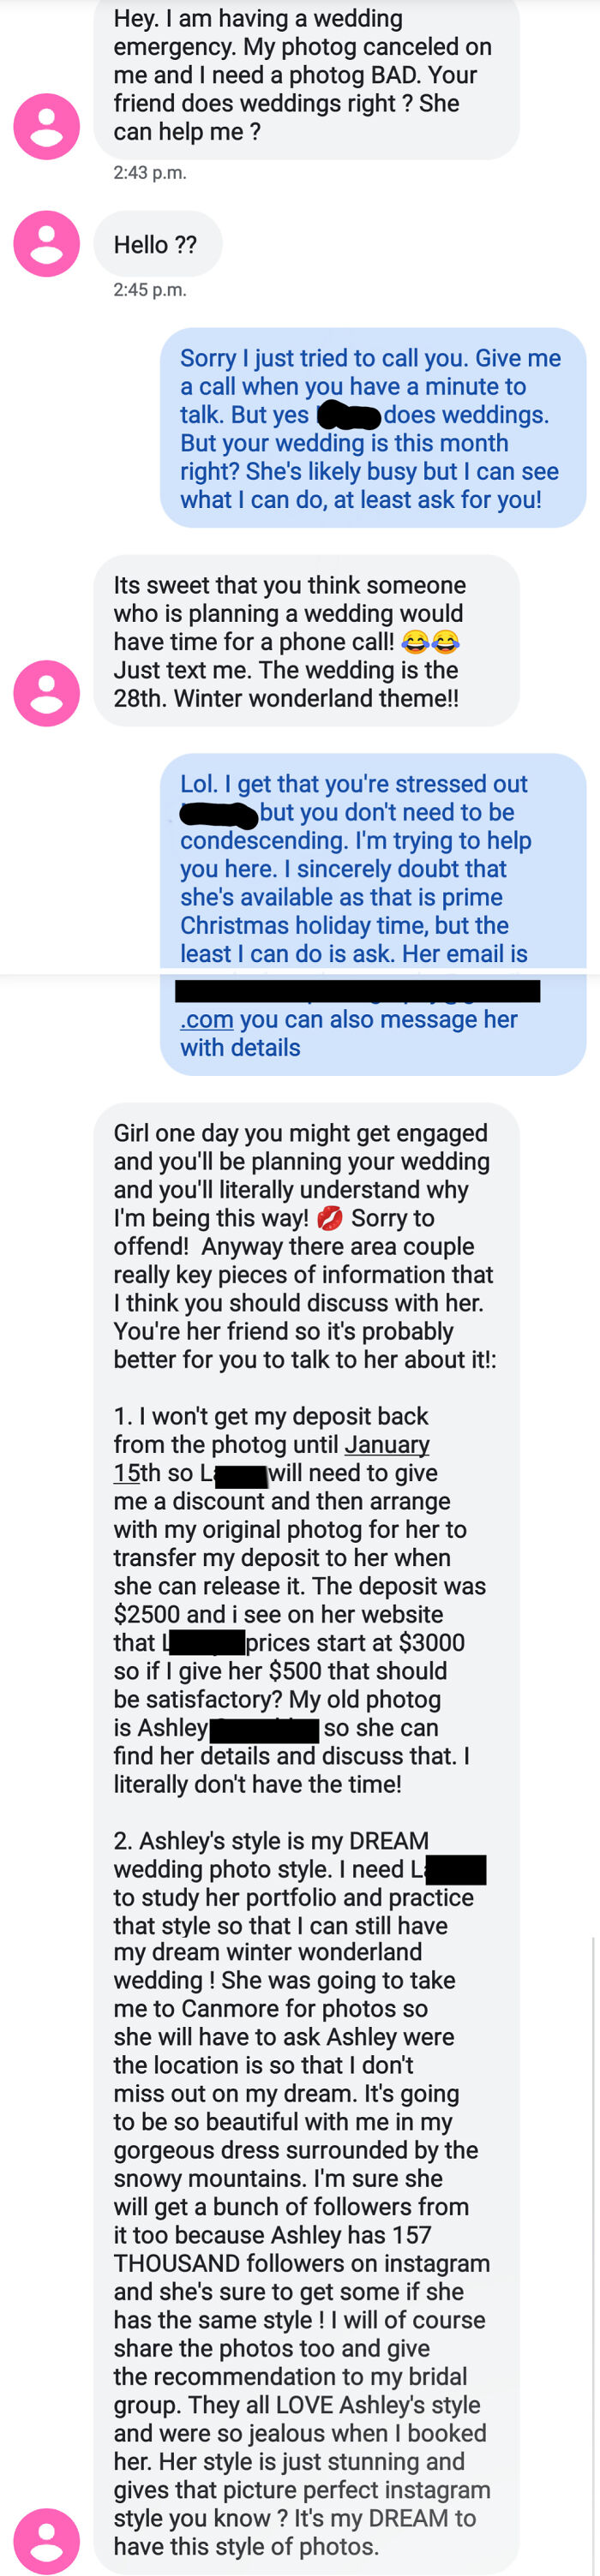 Bride Wants My Photographer Friend To Learn Another Photographer's "Style" And Basically Give Her A Discount For A Wedding That's In A Couple Of Weeks